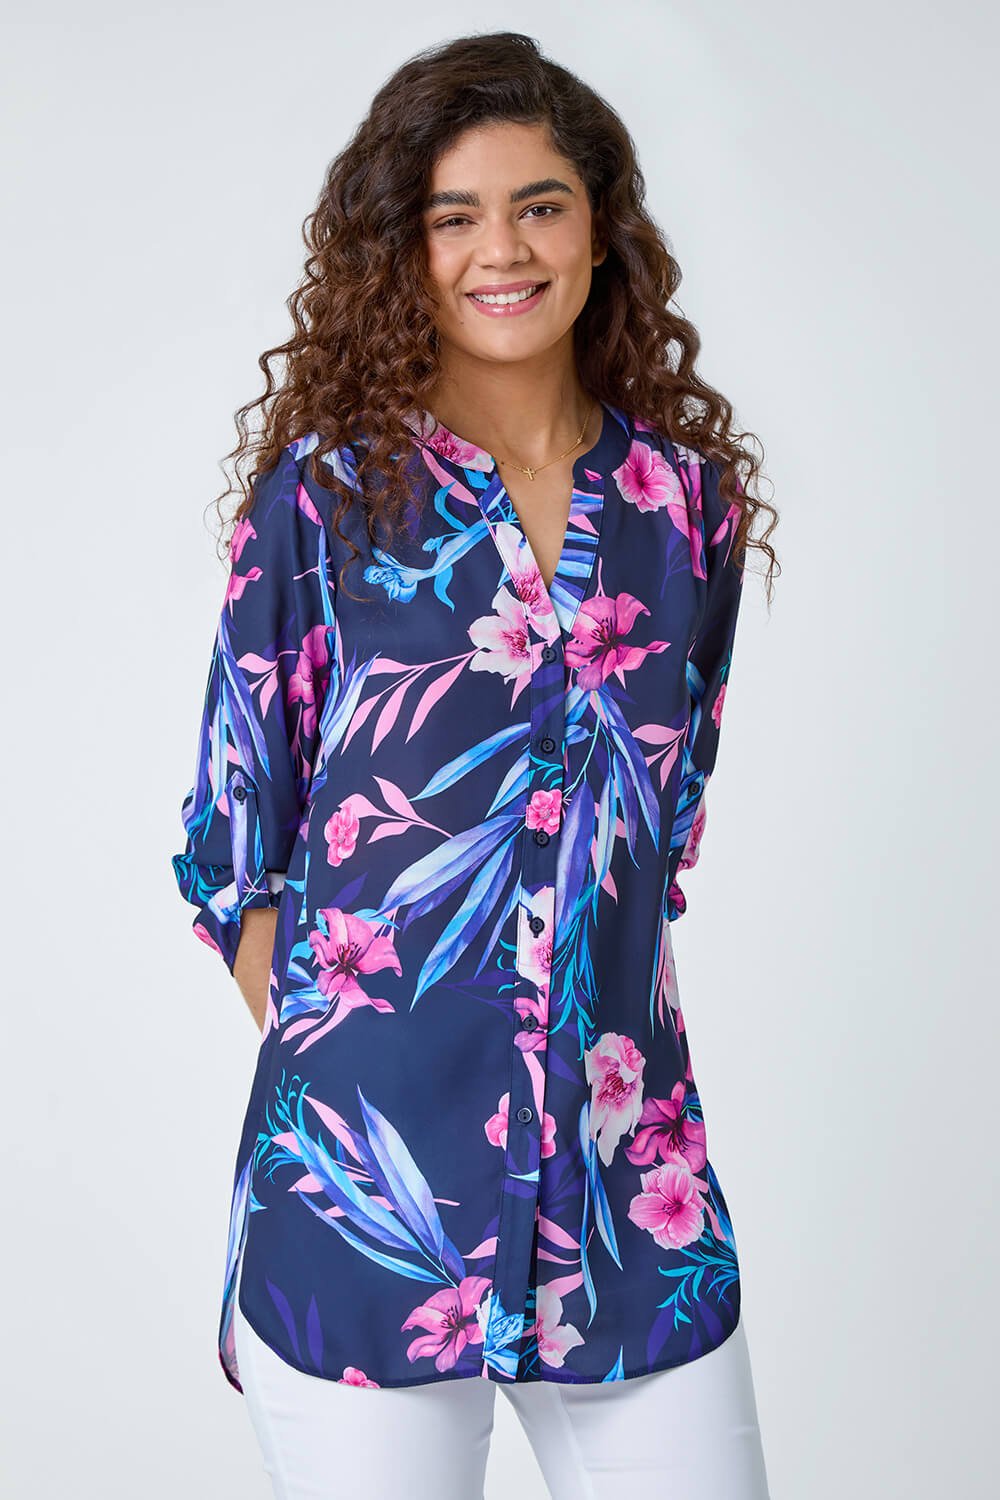 PINK Tropical Print Longline Blouse, Image 2 of 5